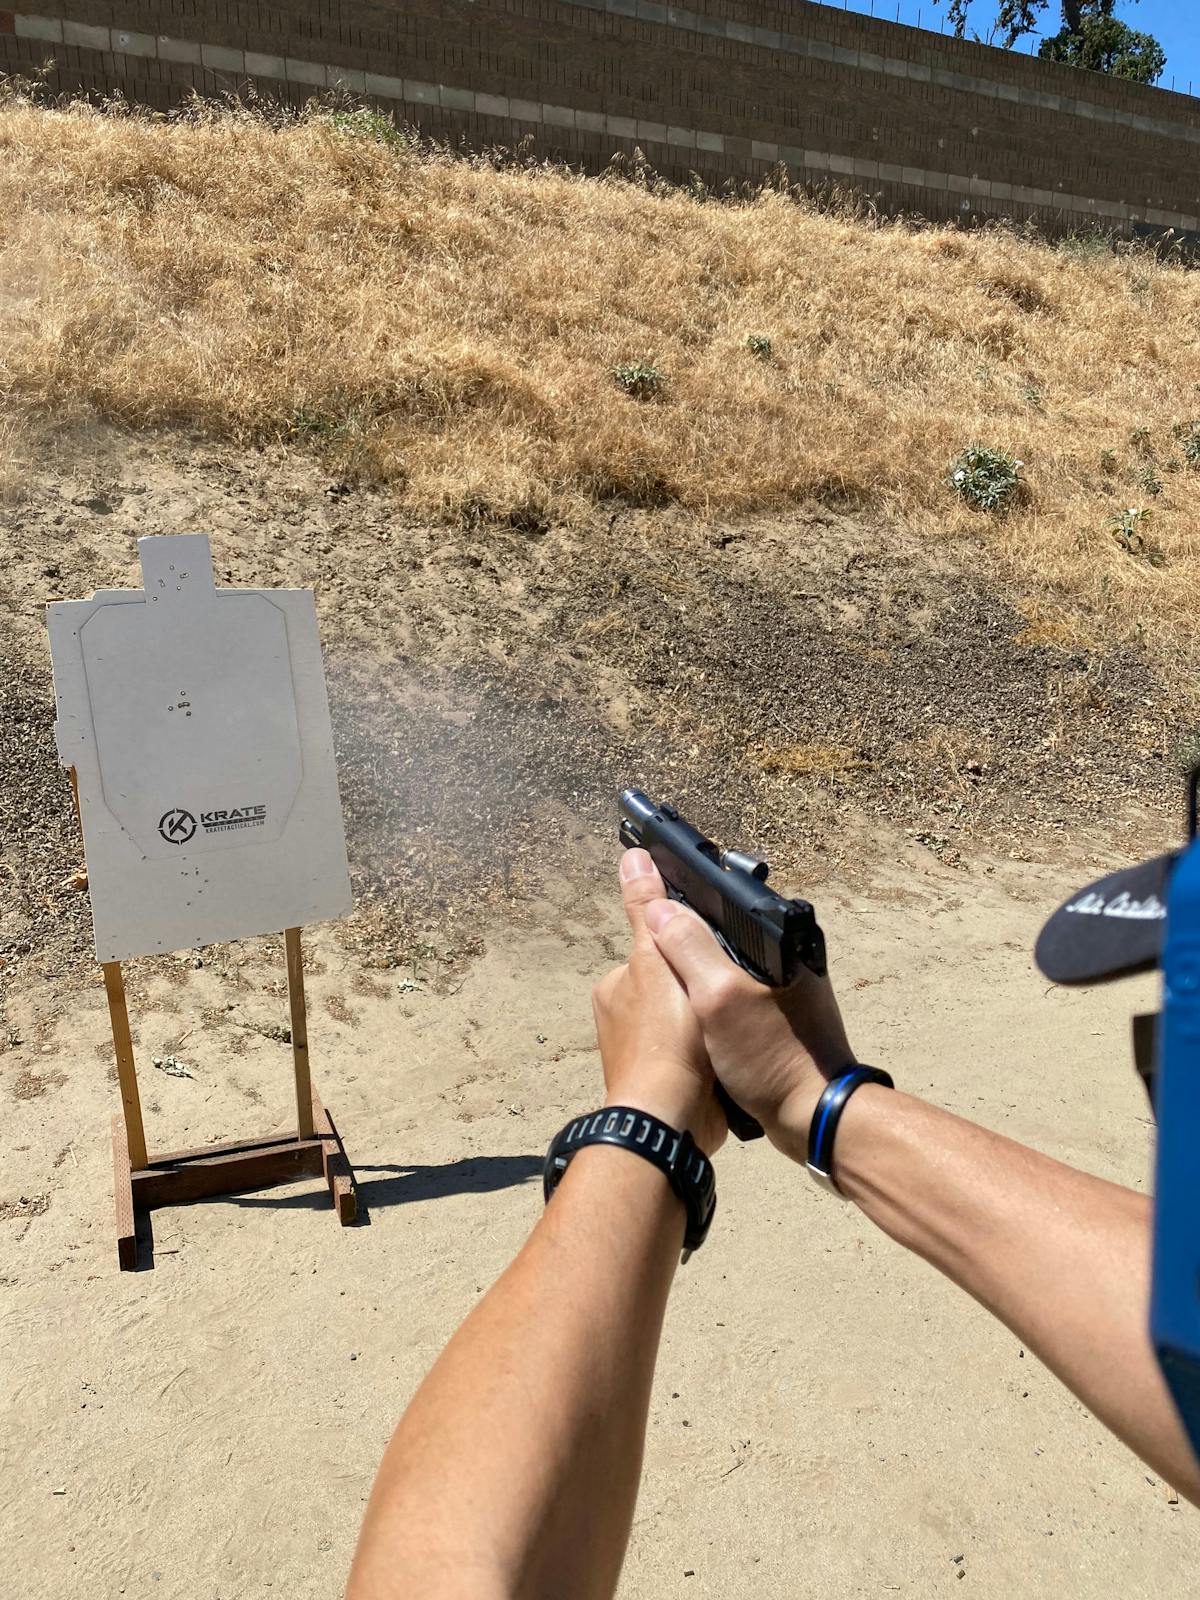 Lindsey shot the Ultra Carry II with Winchester USA 45 ACP AUTO Ammo 230 Grain Full Metal Jacket rounds. It functioned flawlessly, and handled the 230 grain bullets well.